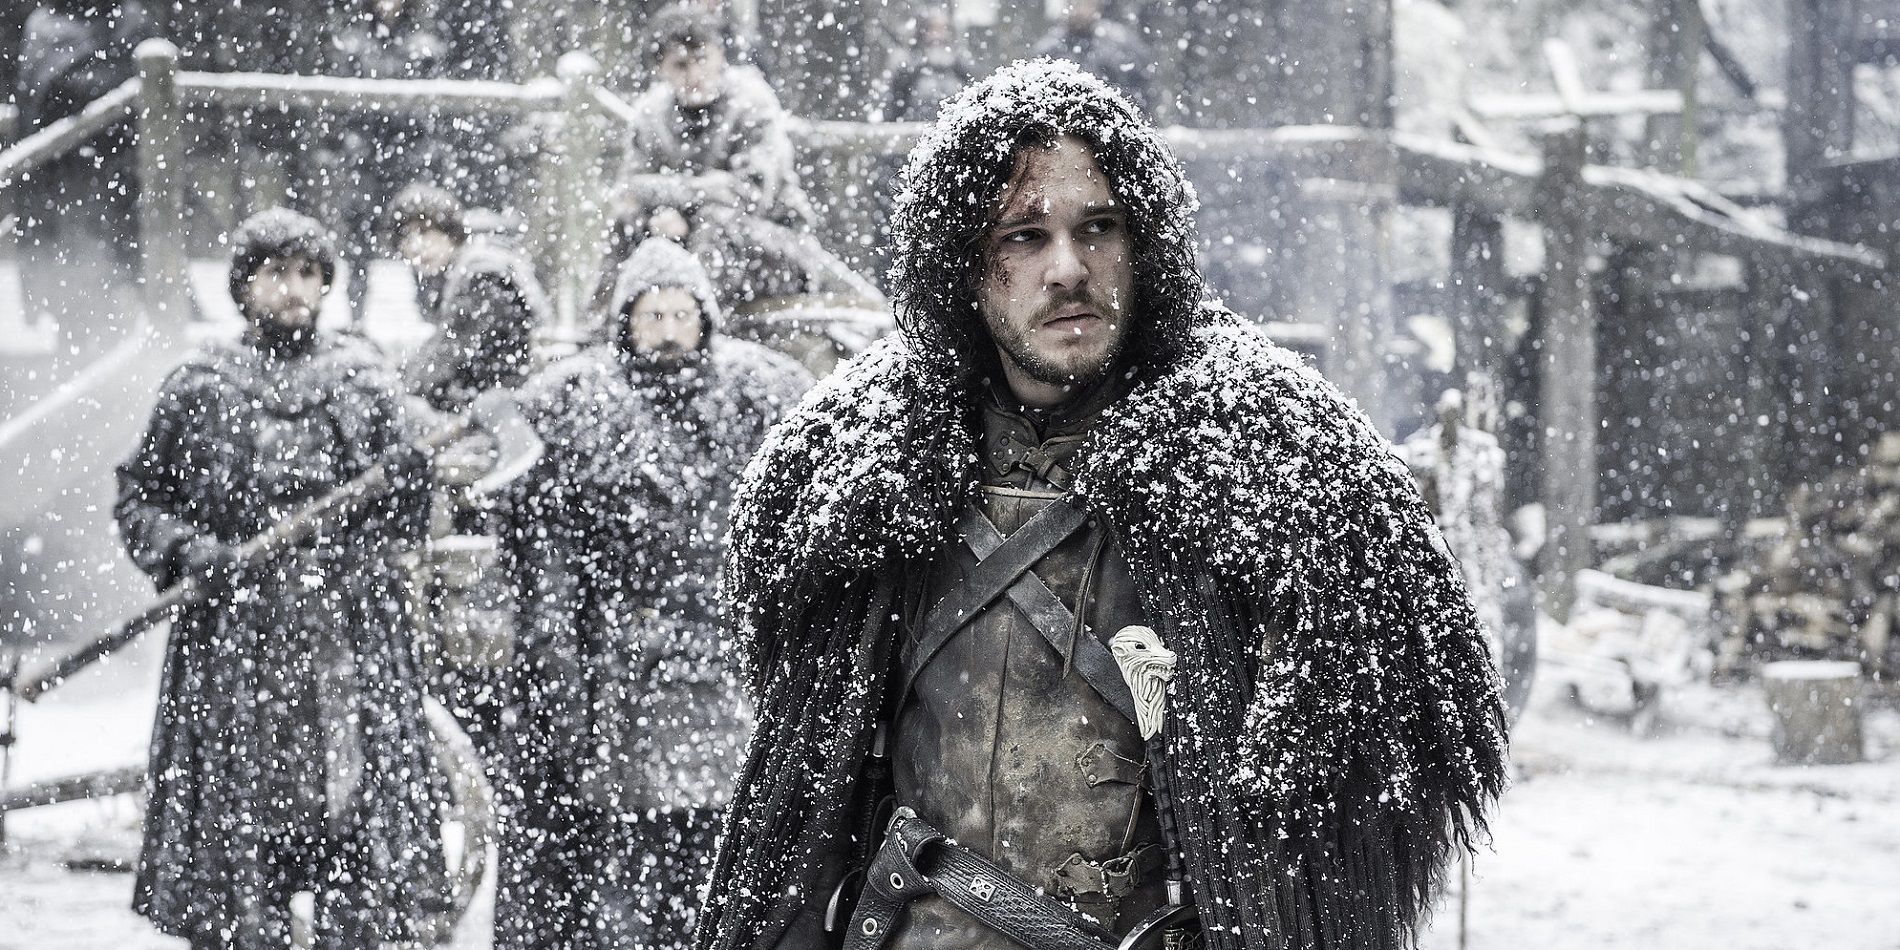 Jon Snow and the Night's Watch at Castle Black